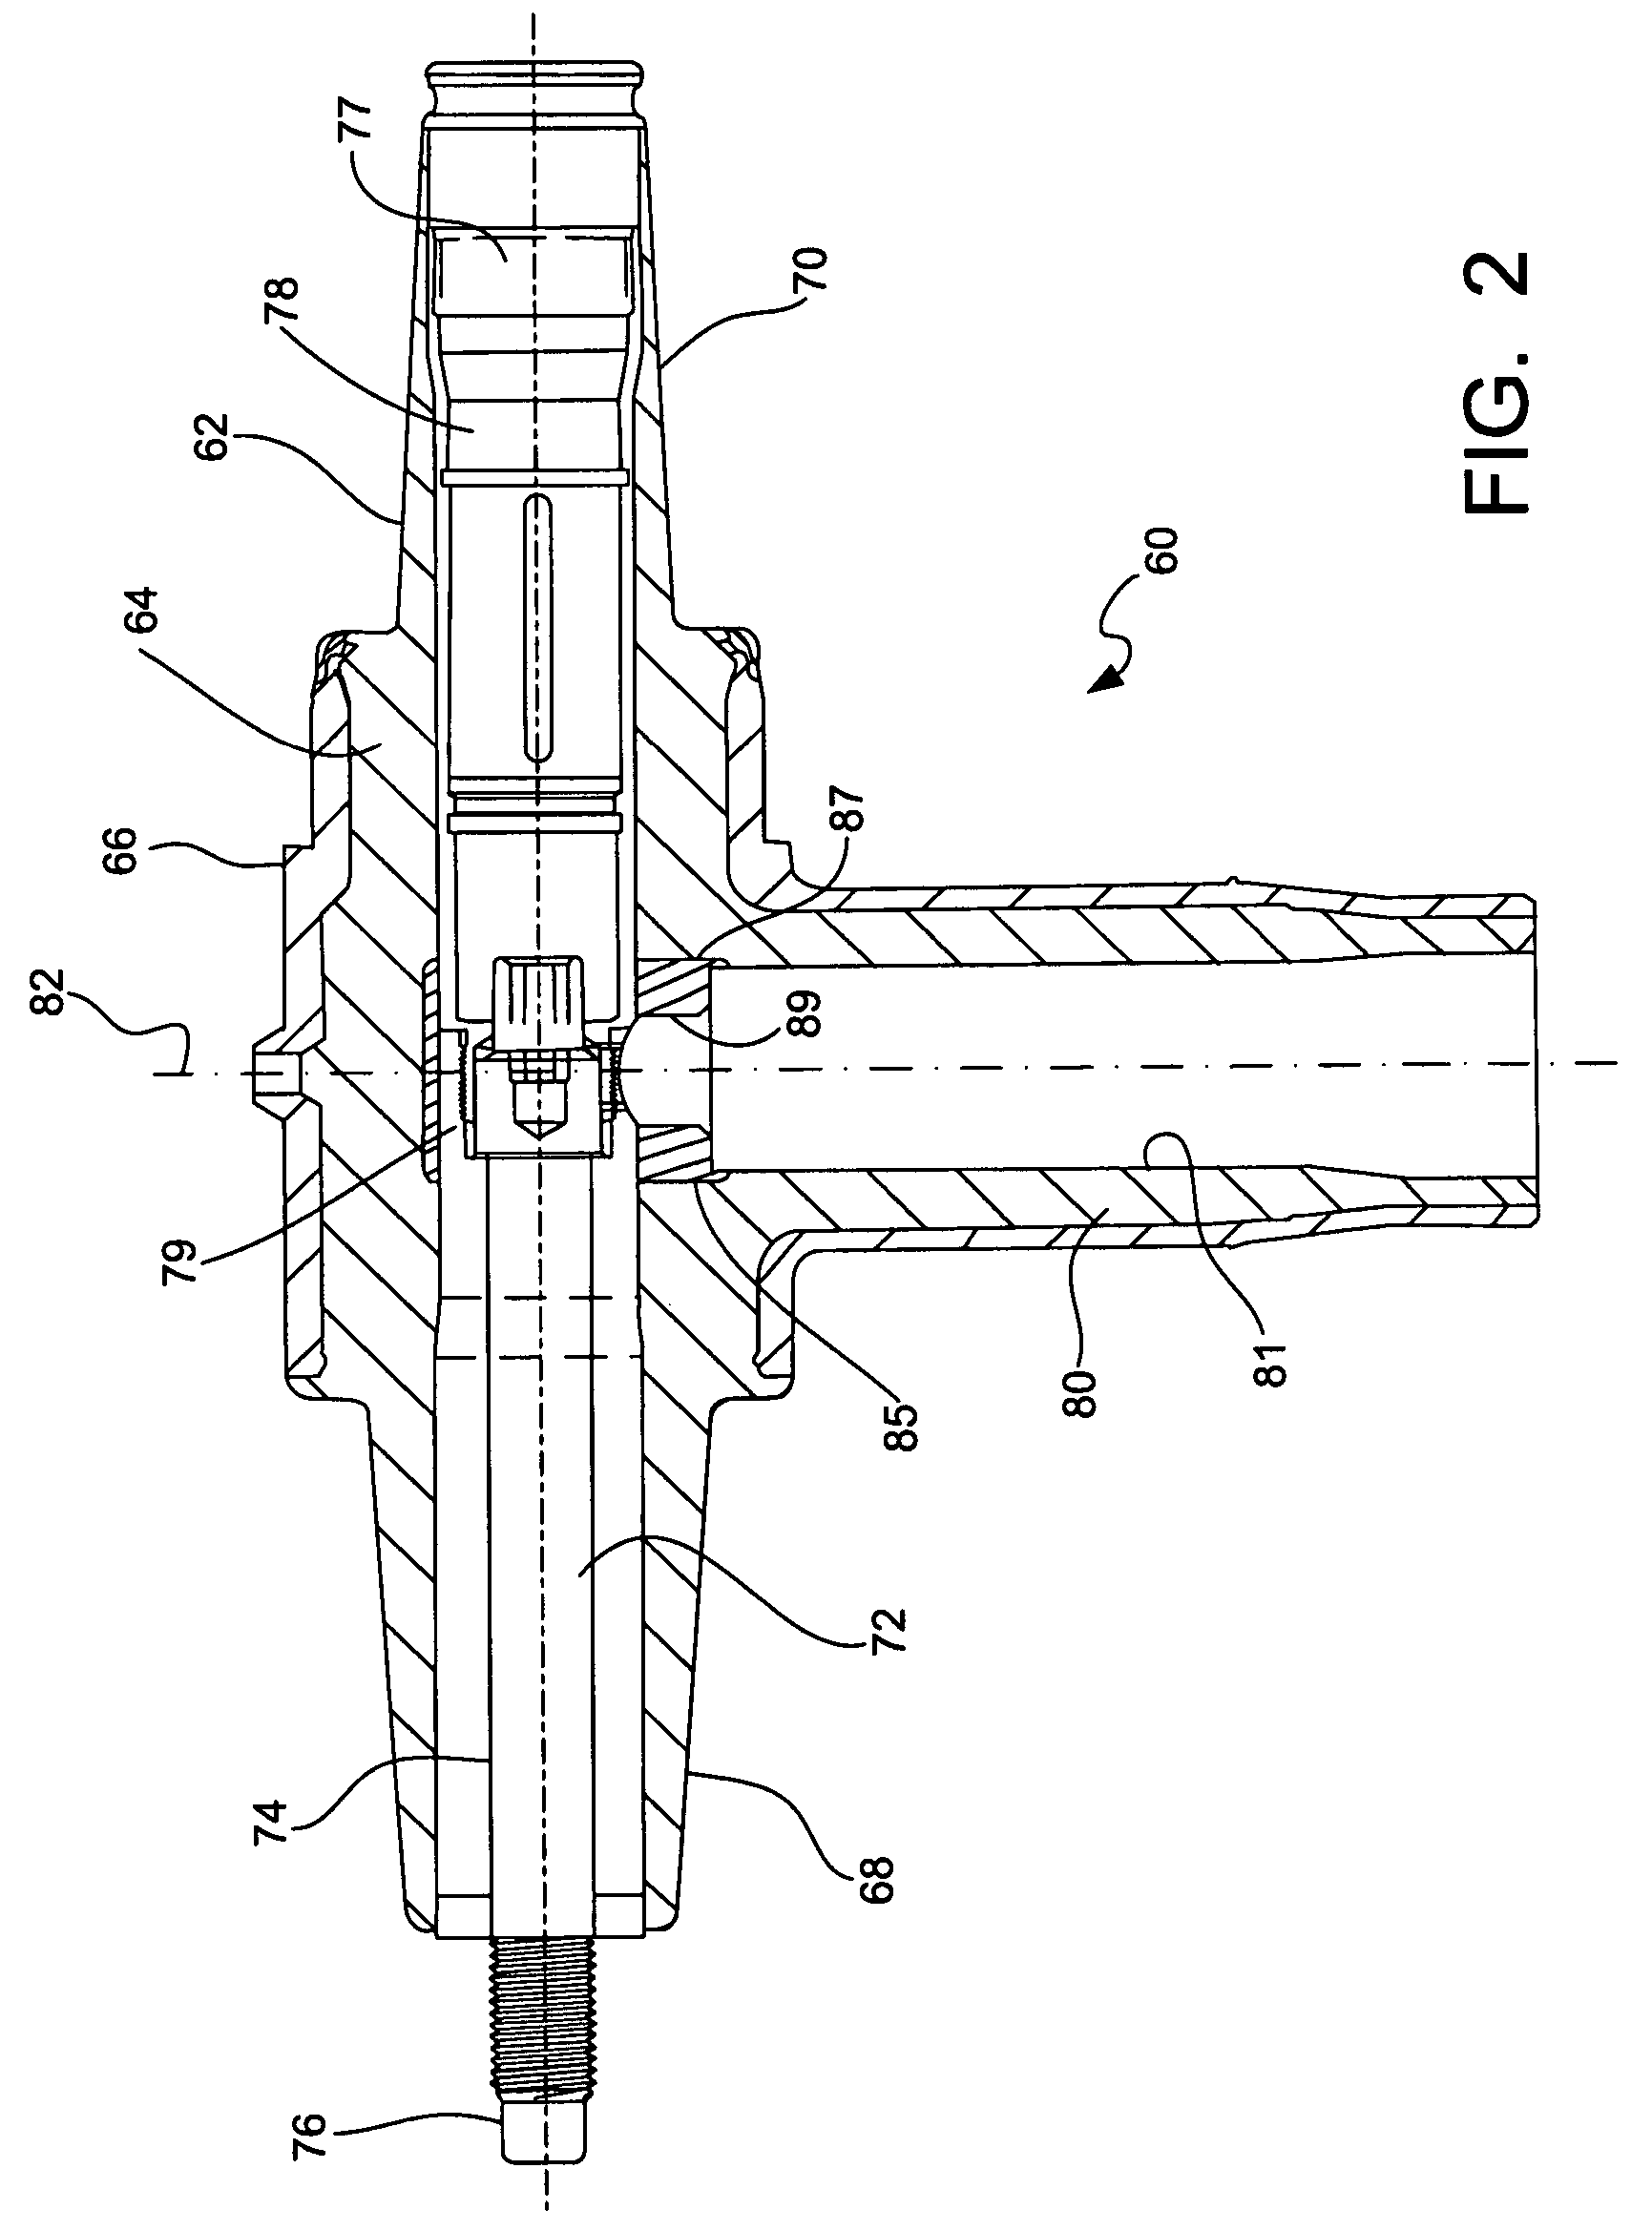 Separable electrical connector component having a voltage output branch and a direct access point